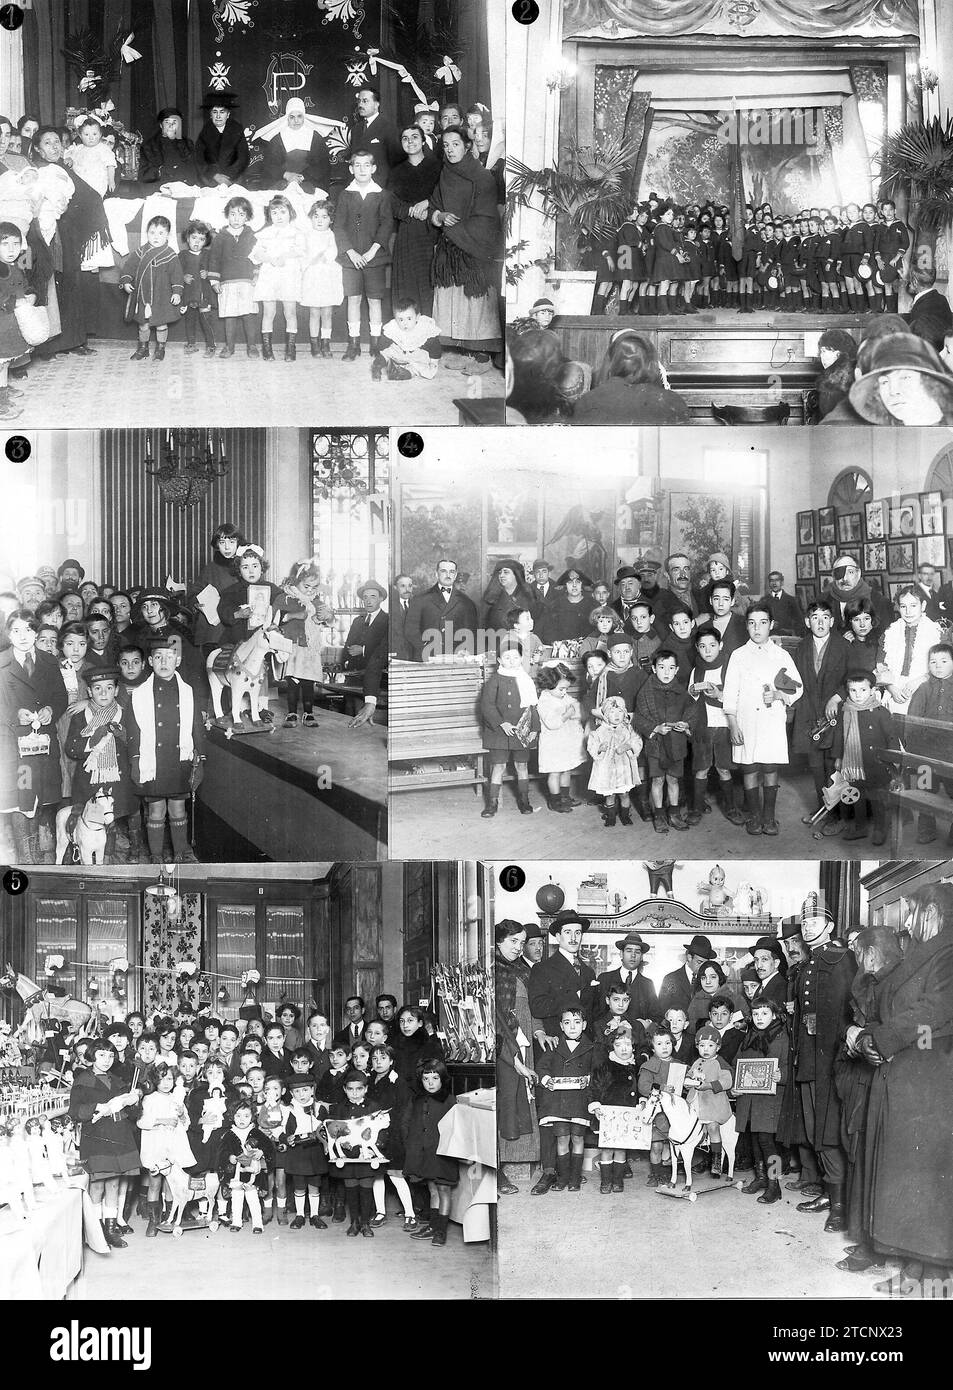 01/05/1921. Madrid. The day of Kings. Clothing distributions Verified yesterday at the Milk Drop clinic (1), Medical Orphans School (2), and Toys at the Hijos de Madrid center (3), Aguirre Schools (4), promotion of the Arts (5), and Maurist youth (6). (Photos. Duque, Larregla and Portela). Credit: Album / Archivo ABC / Julio Duque Stock Photo